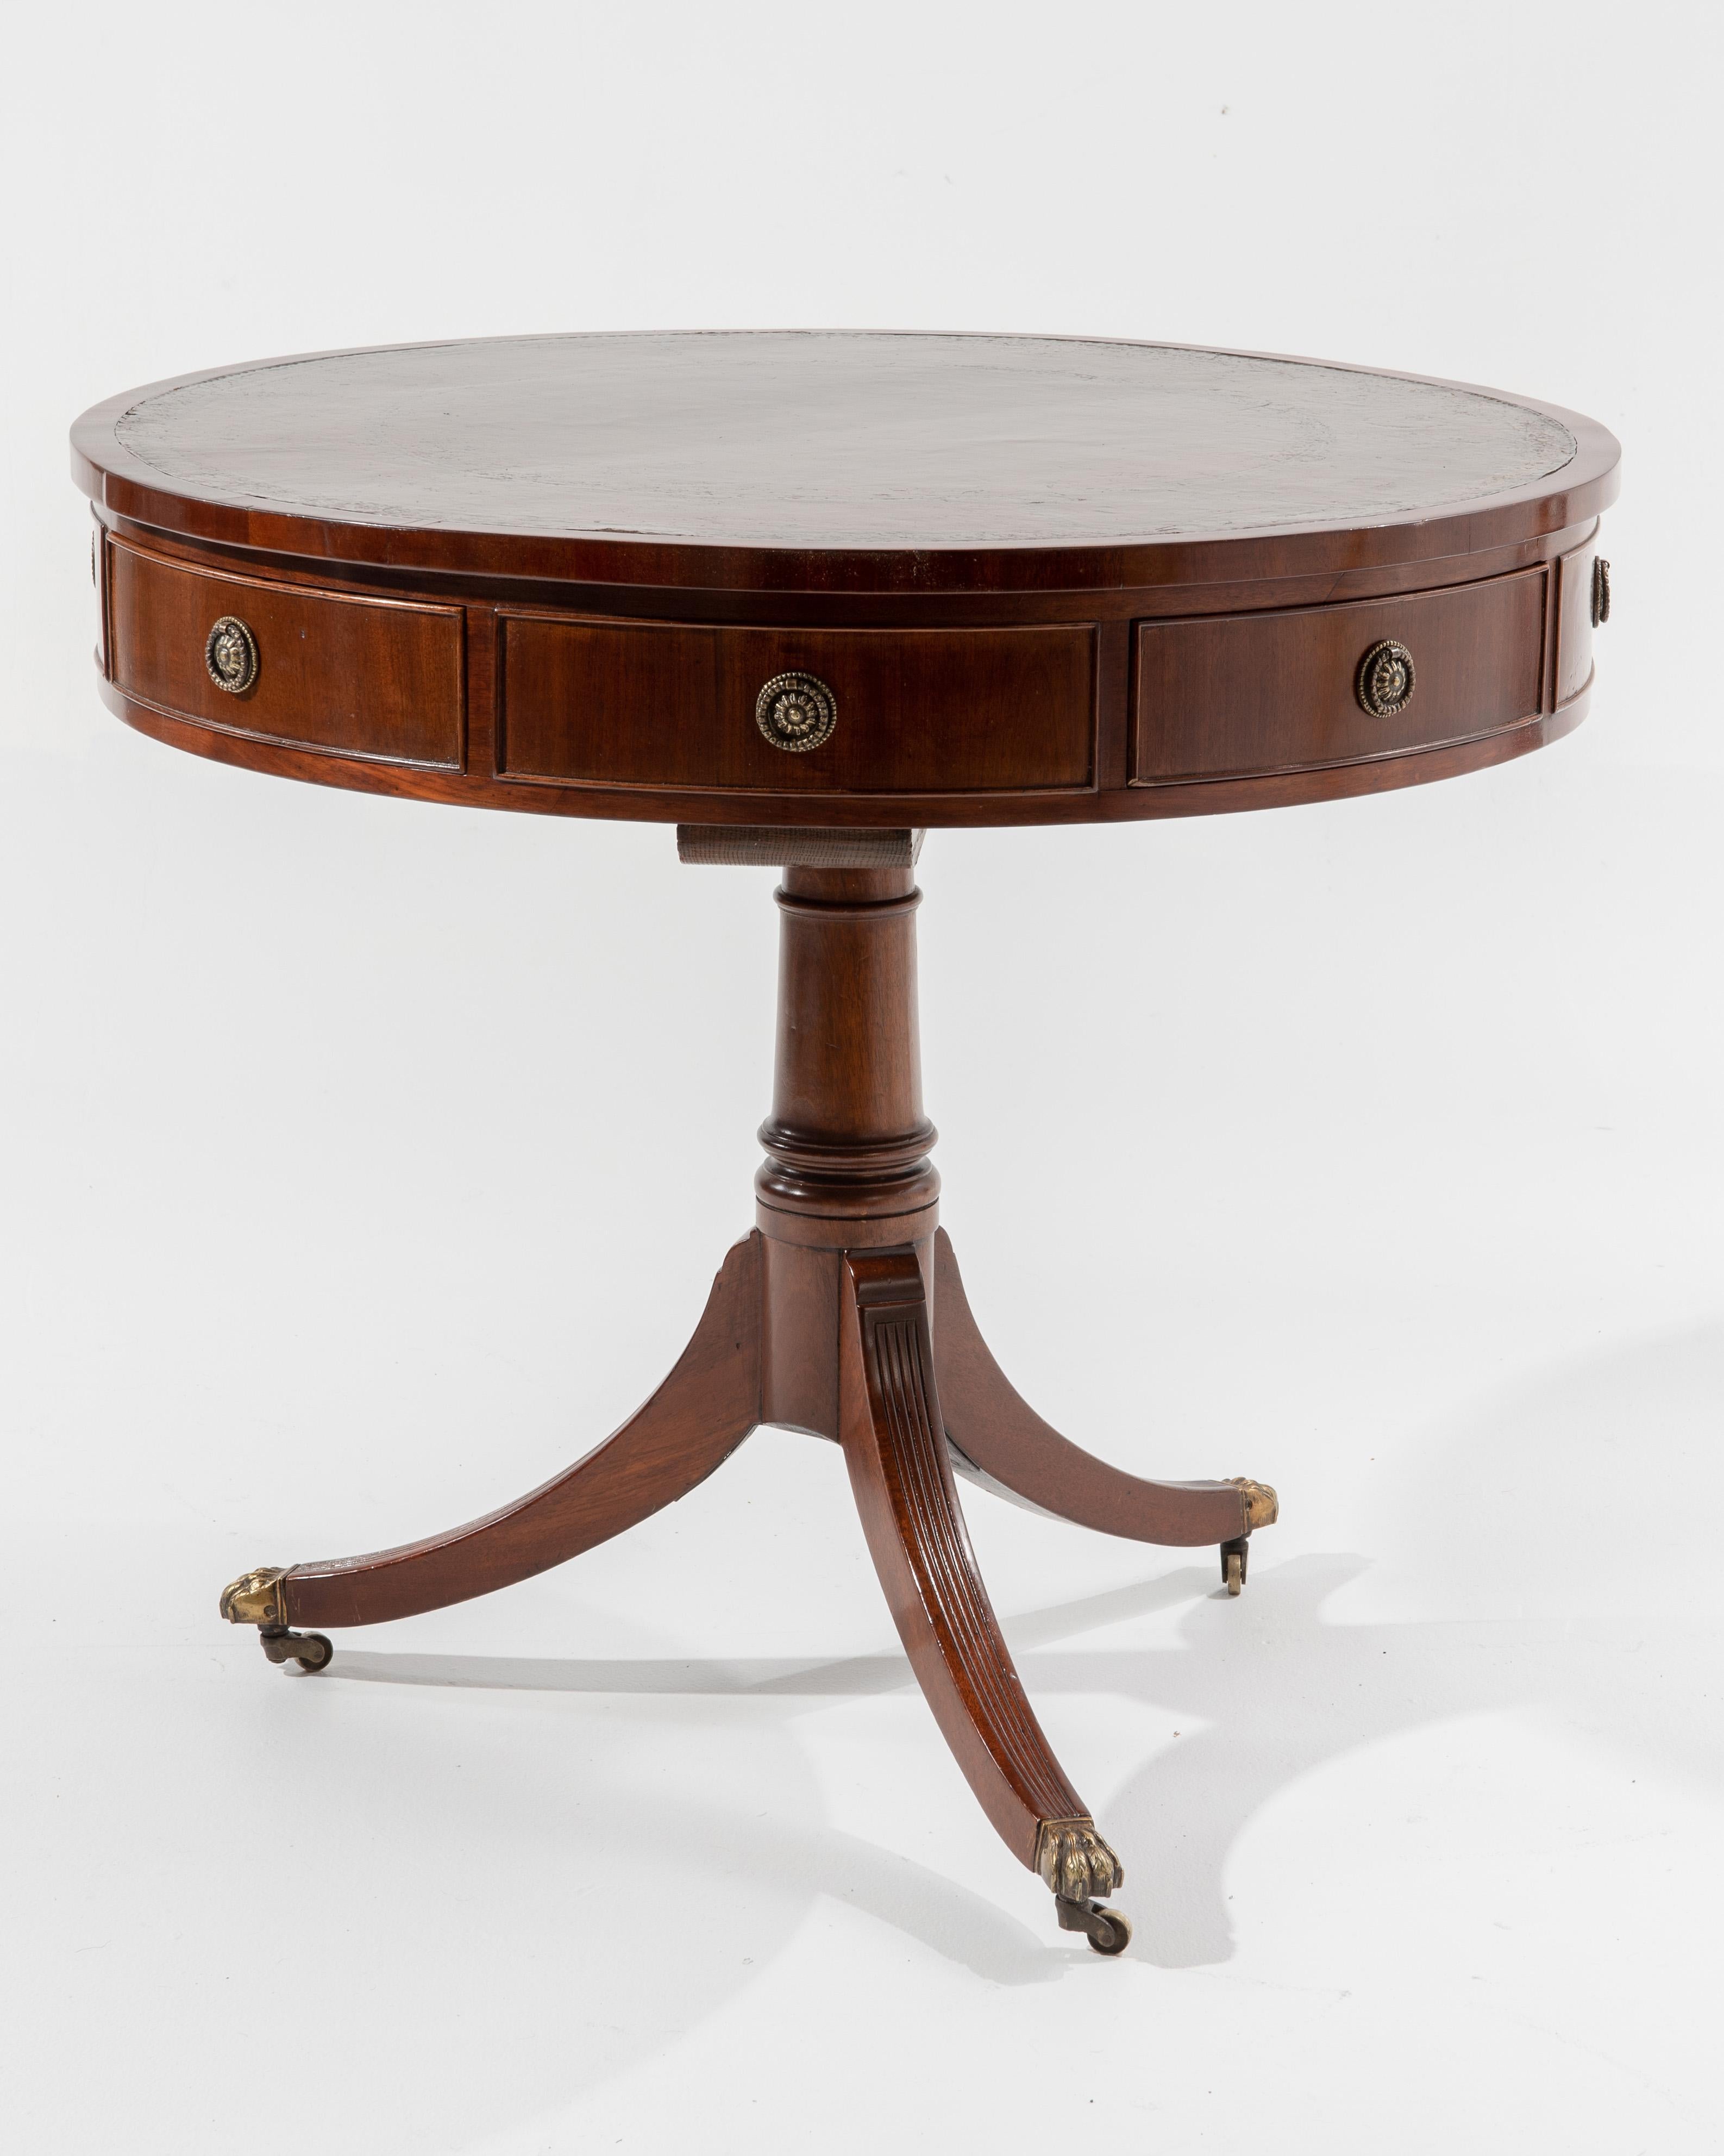 Graceful and Classic cabinetmaker rent table. The leather top with gilt tooling decoration with brass ring handles on the surrounding drawers resting on a Classic splayed pedestal base with brass castors, early 20th century, circa 1910 from a New